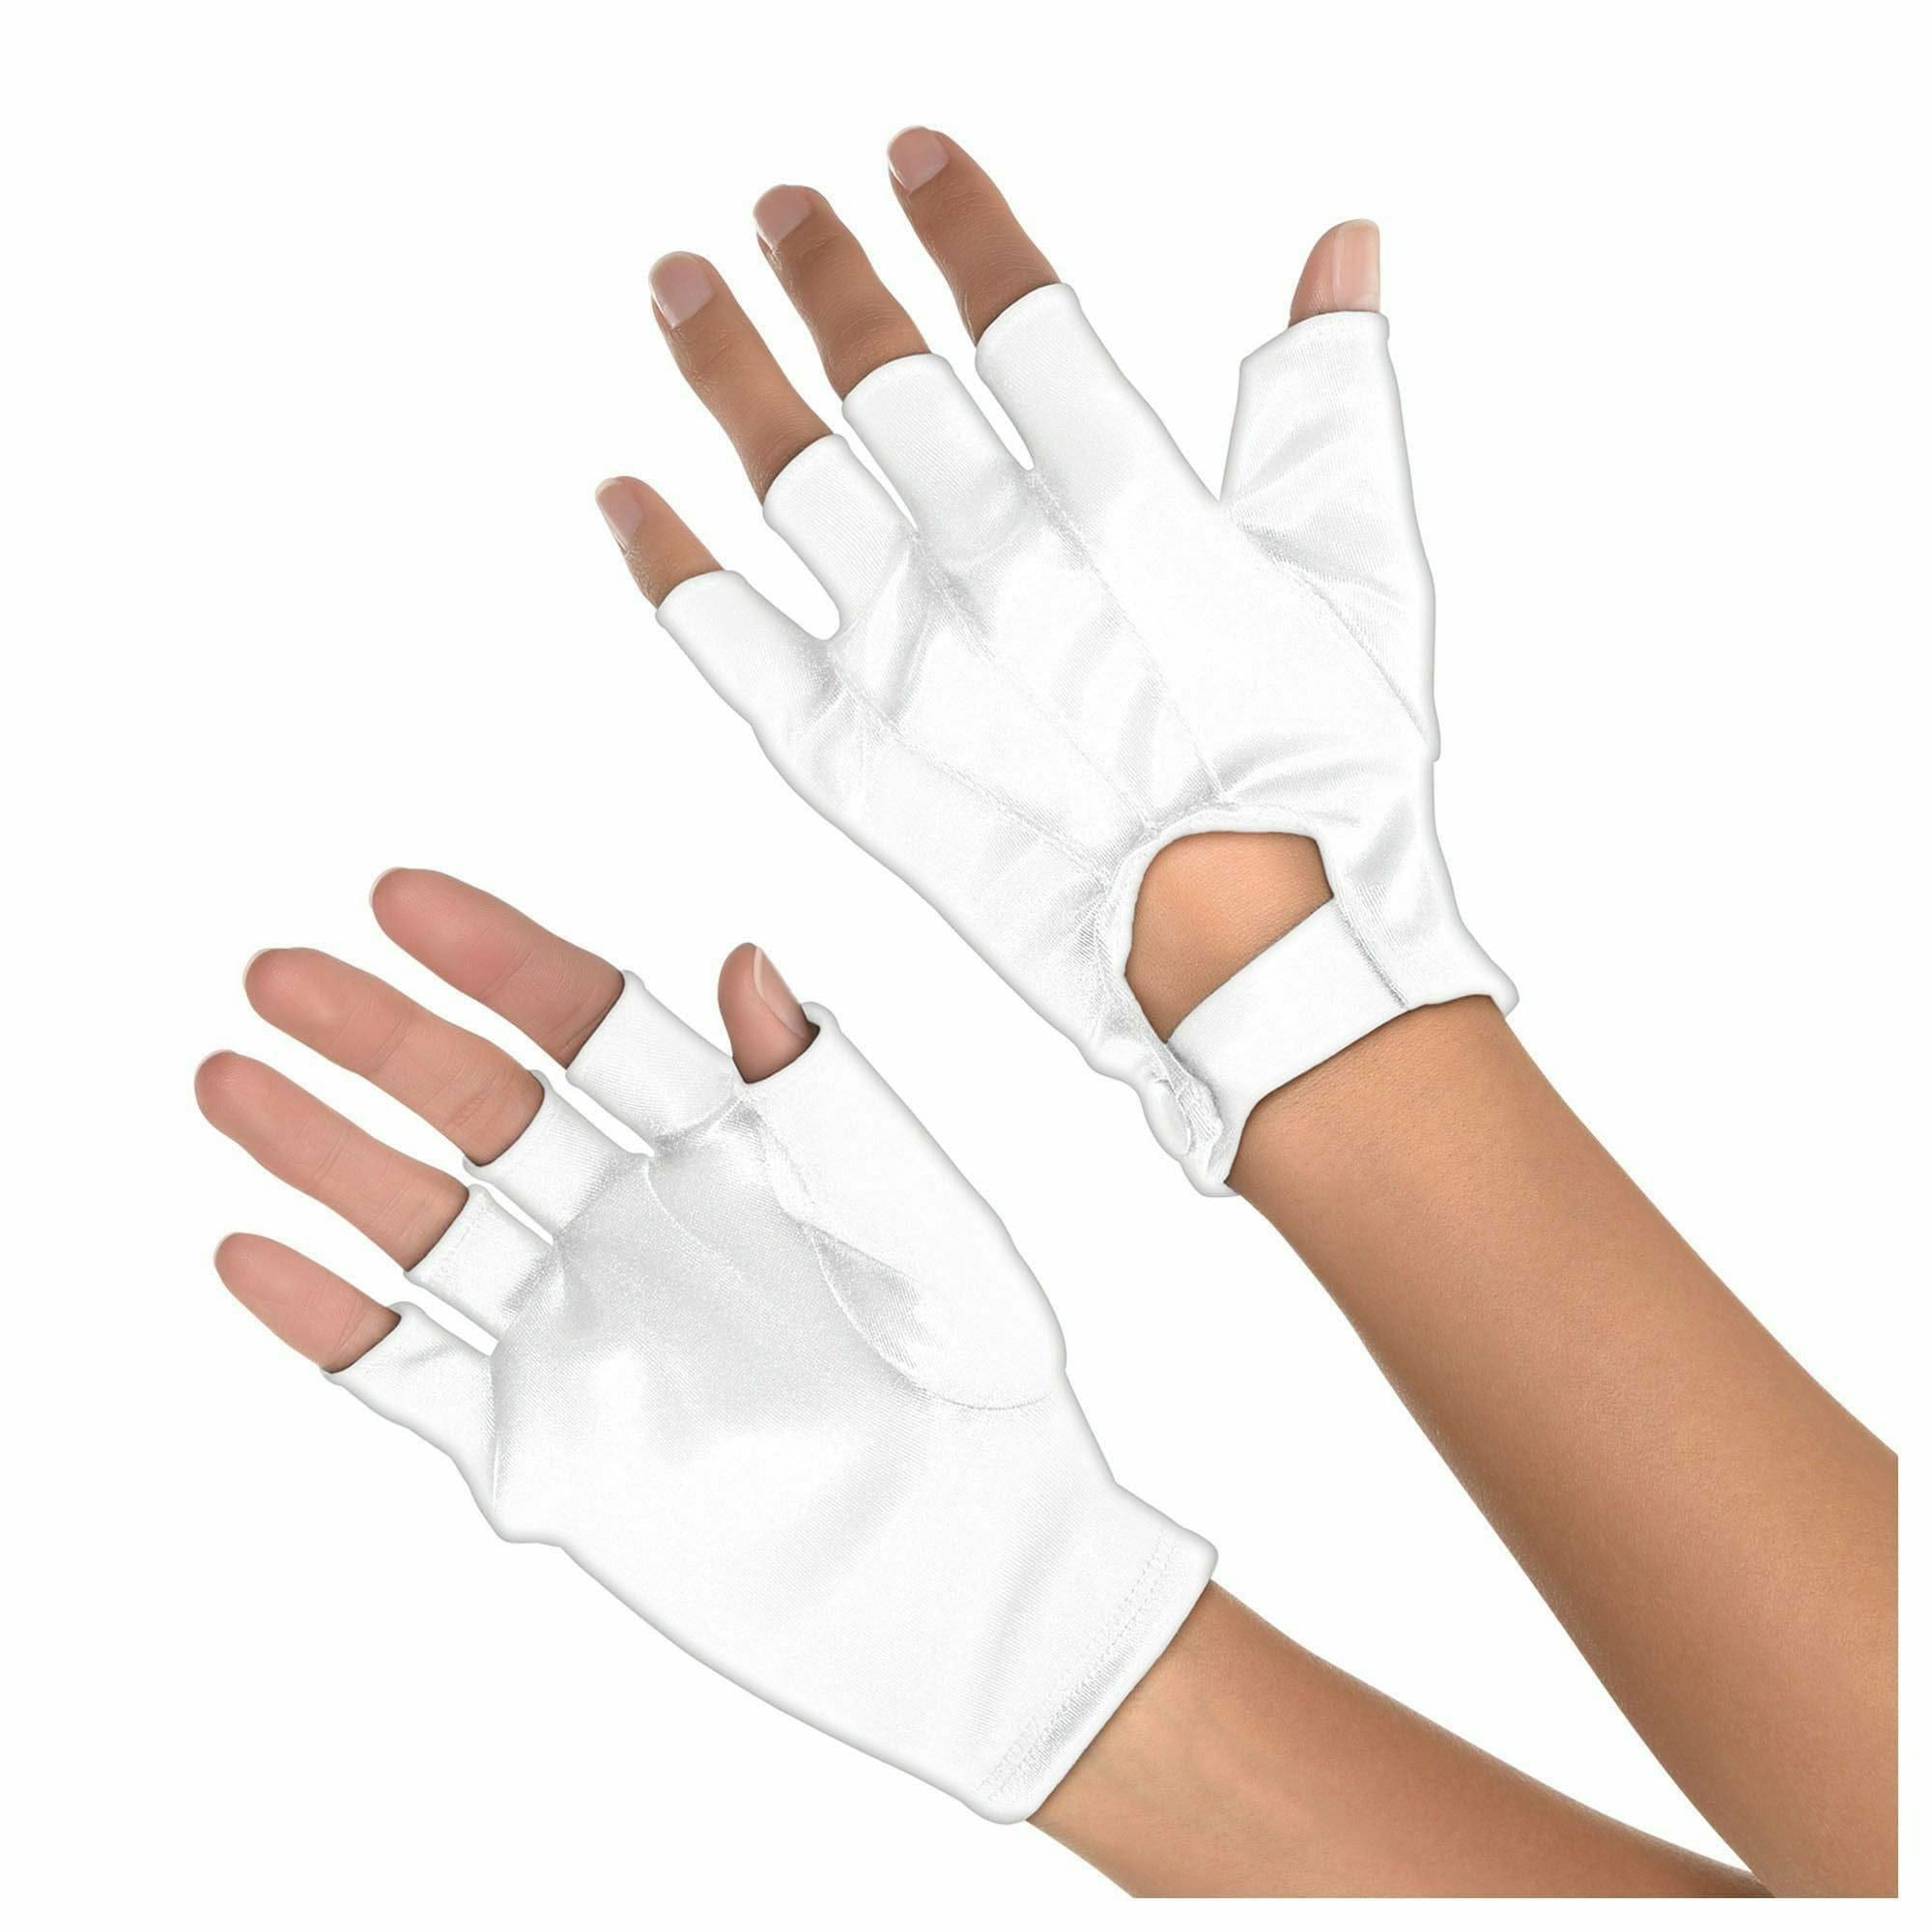 Amscan COSTUMES: ACCESSORIES White Short Fingerless Gloves - Adult